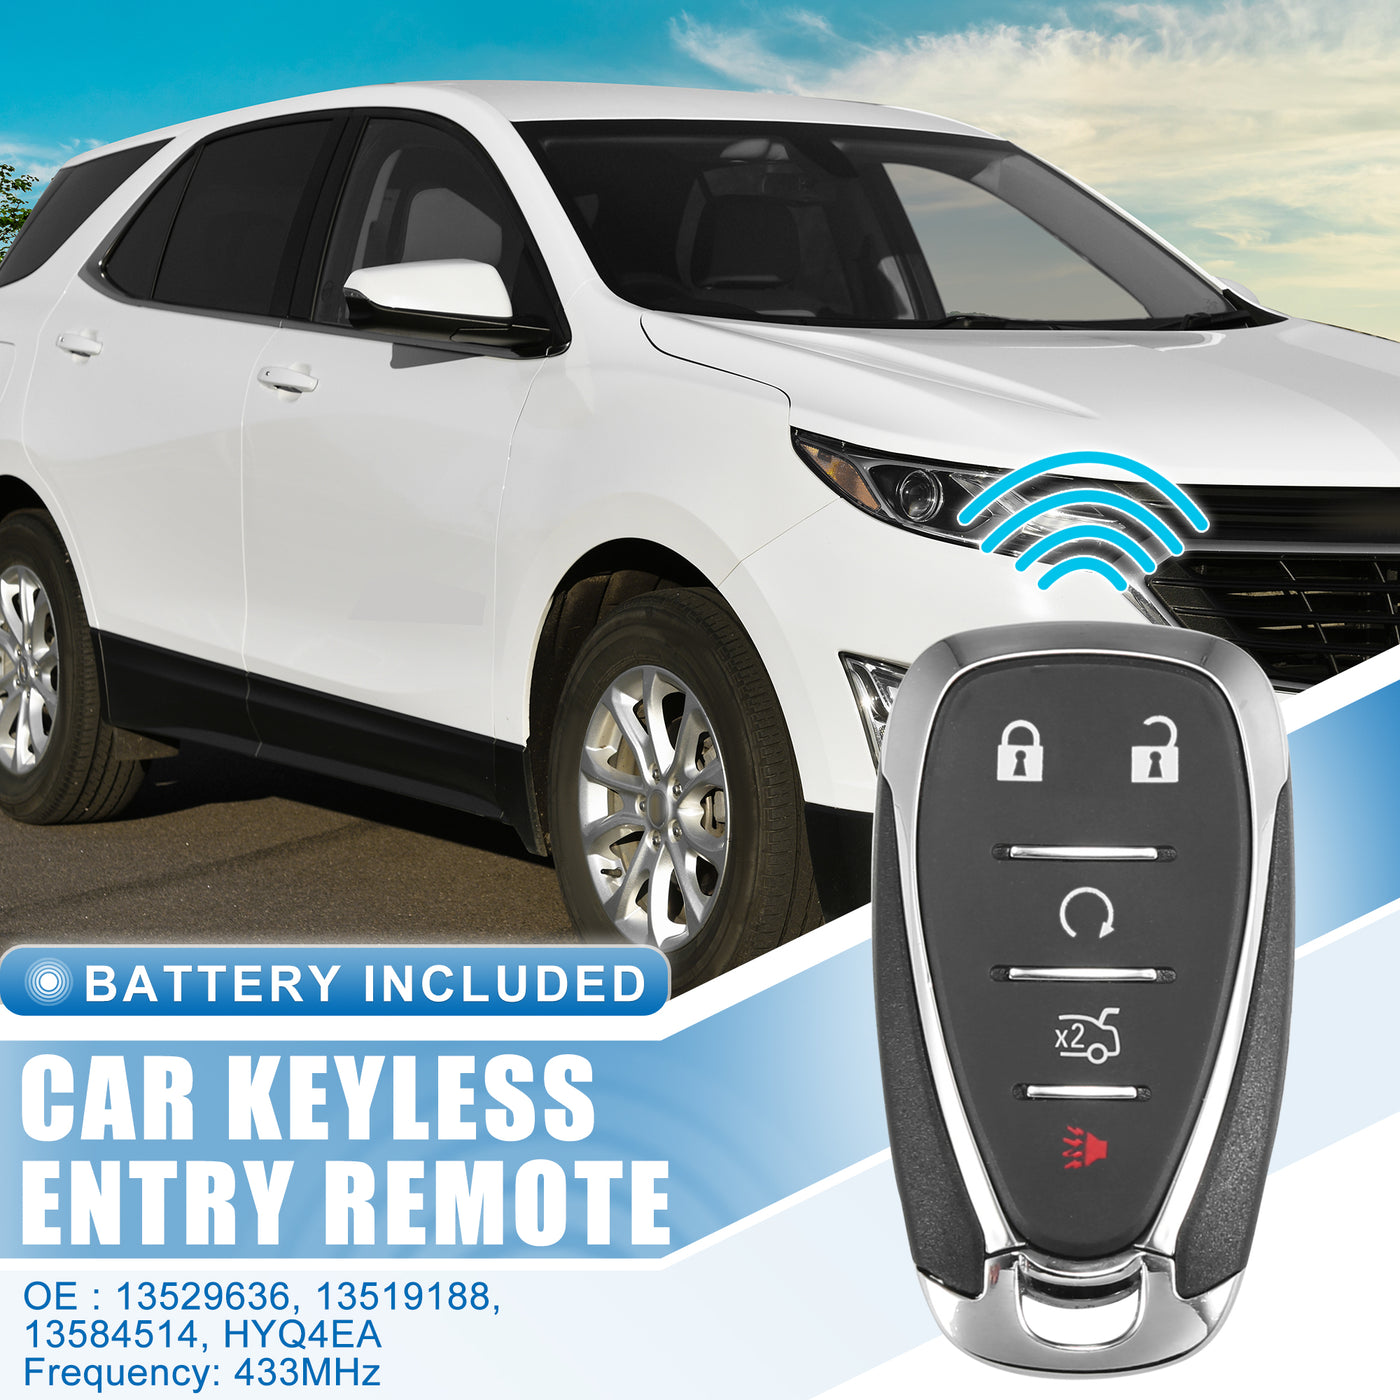 X AUTOHAUX 5 Button SUV Keyless Entry Remote Control Replacement Key Fob Proximity Smart Fob HYQ4EA for Chevrolet Traverse 2018-2020 433MHz 46 Chip